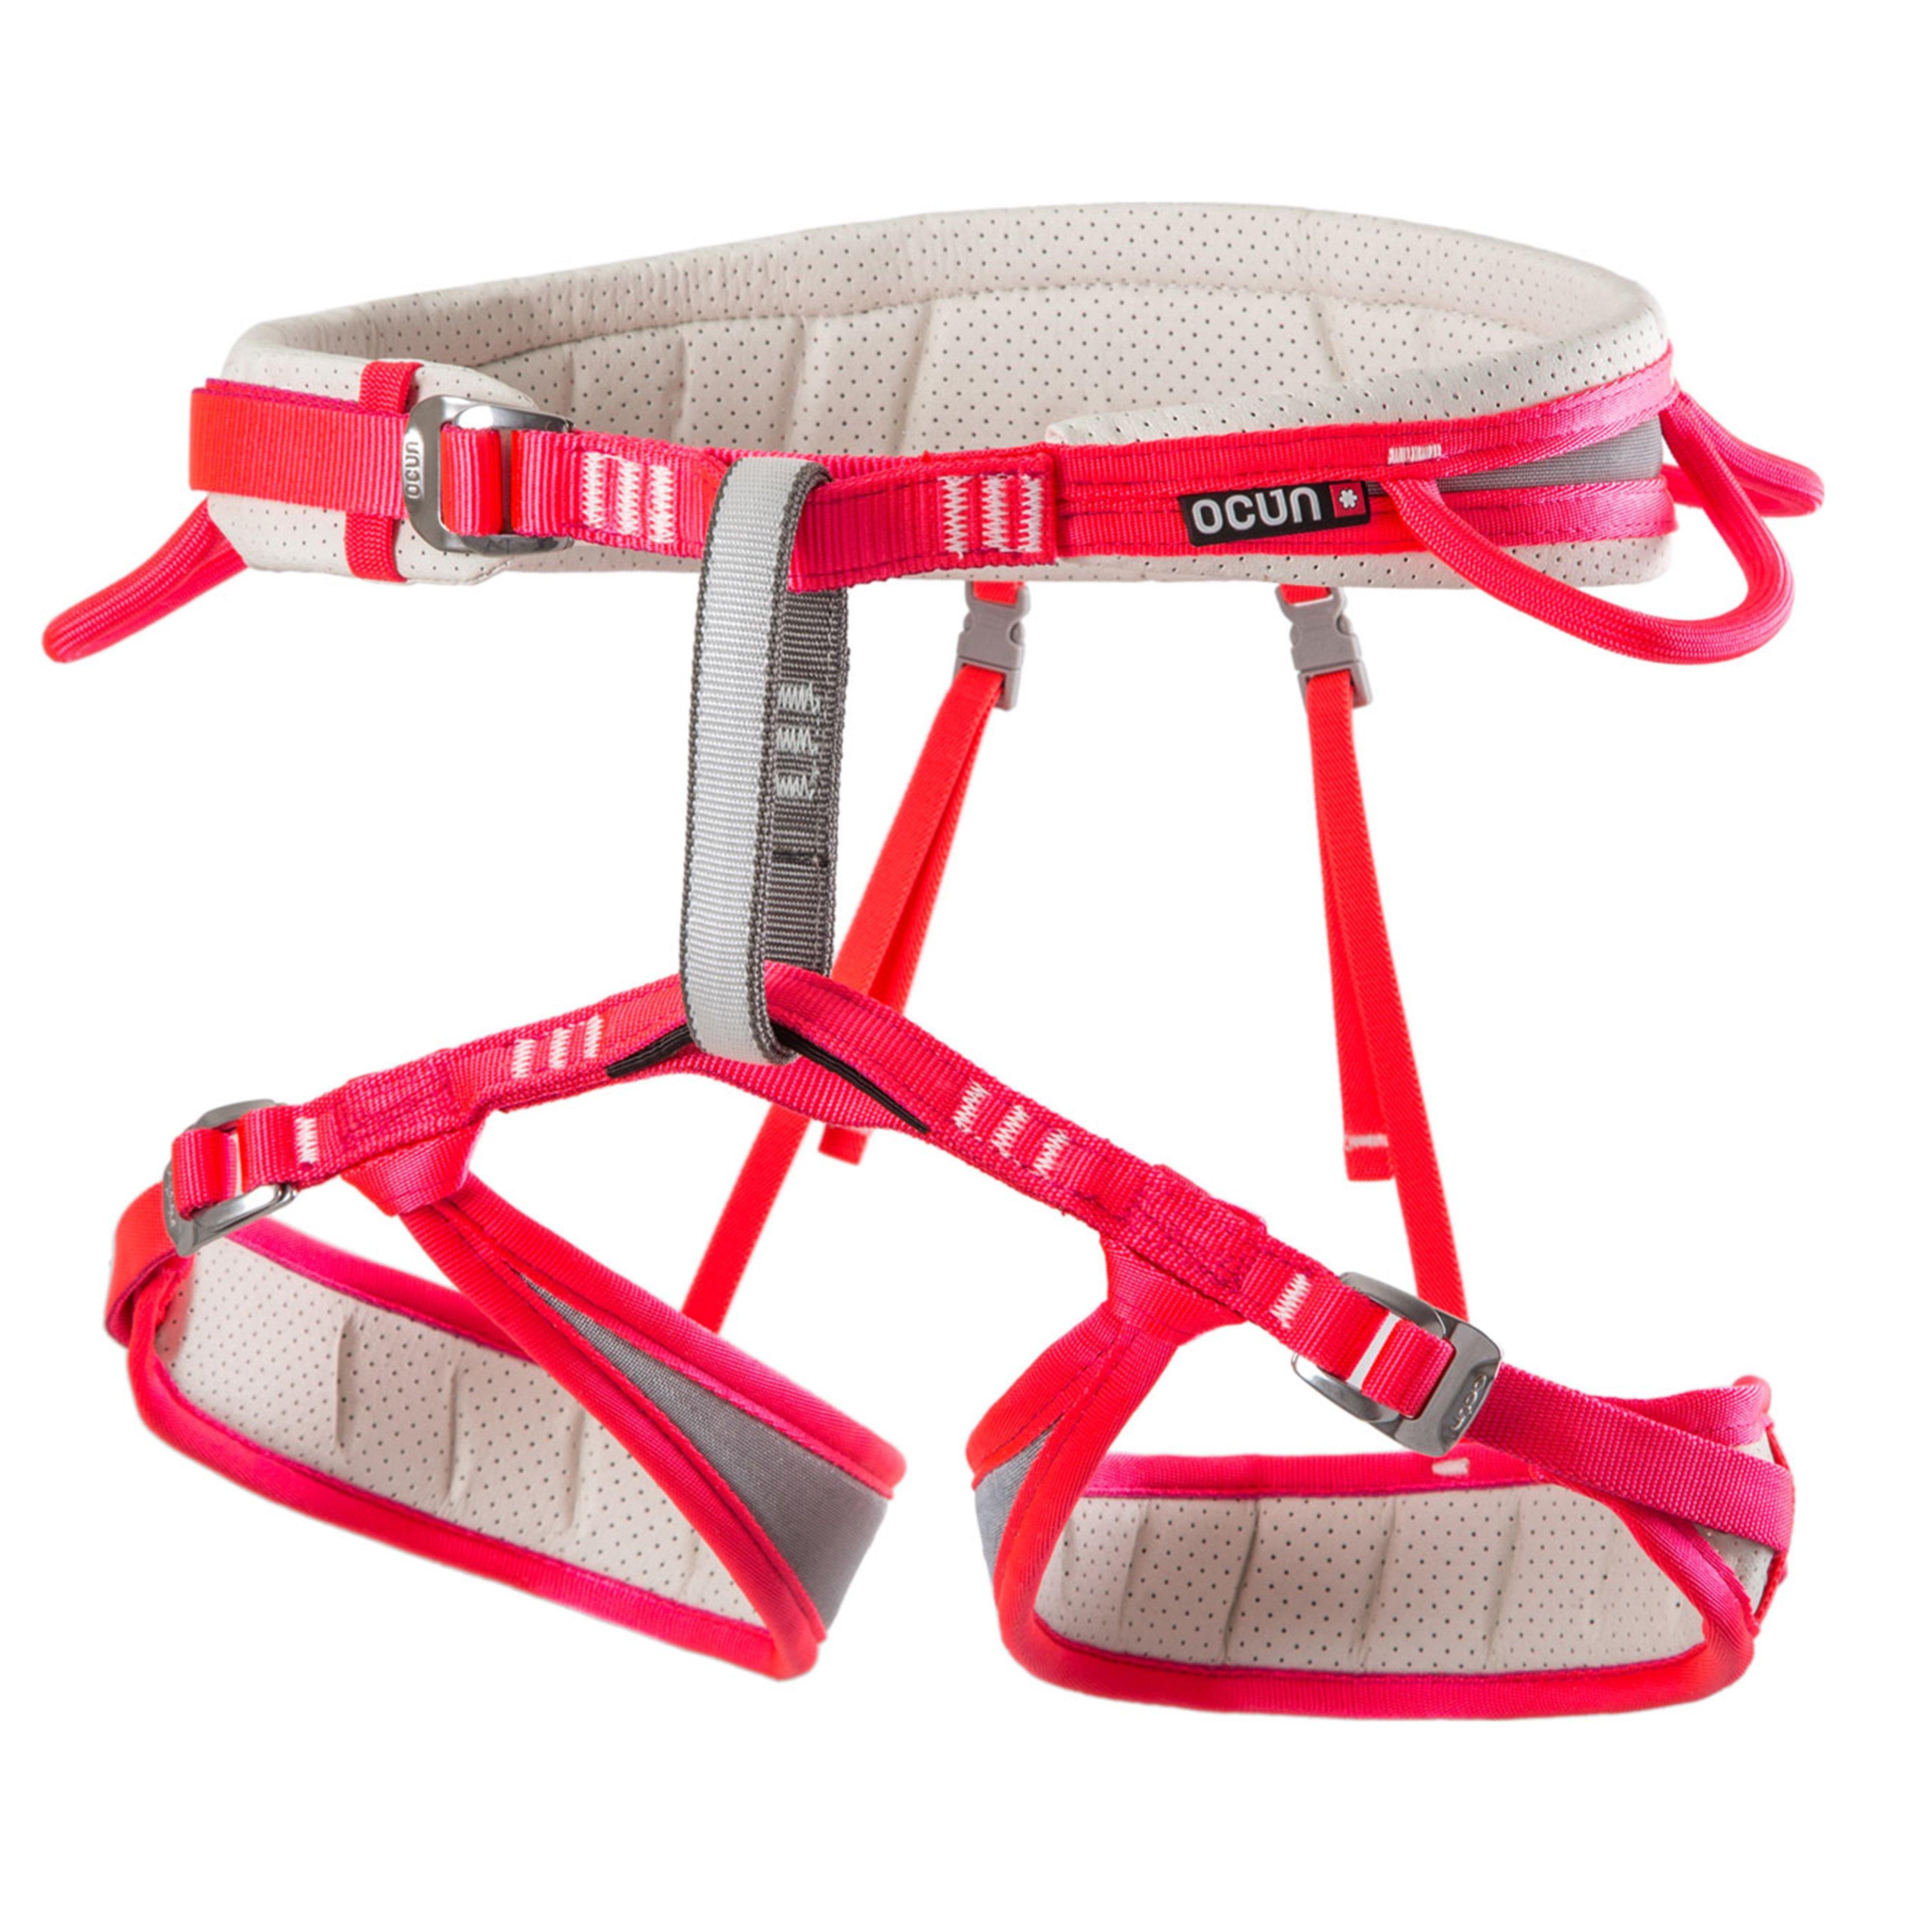 Ocun Neon Lady Climbing Harness Review